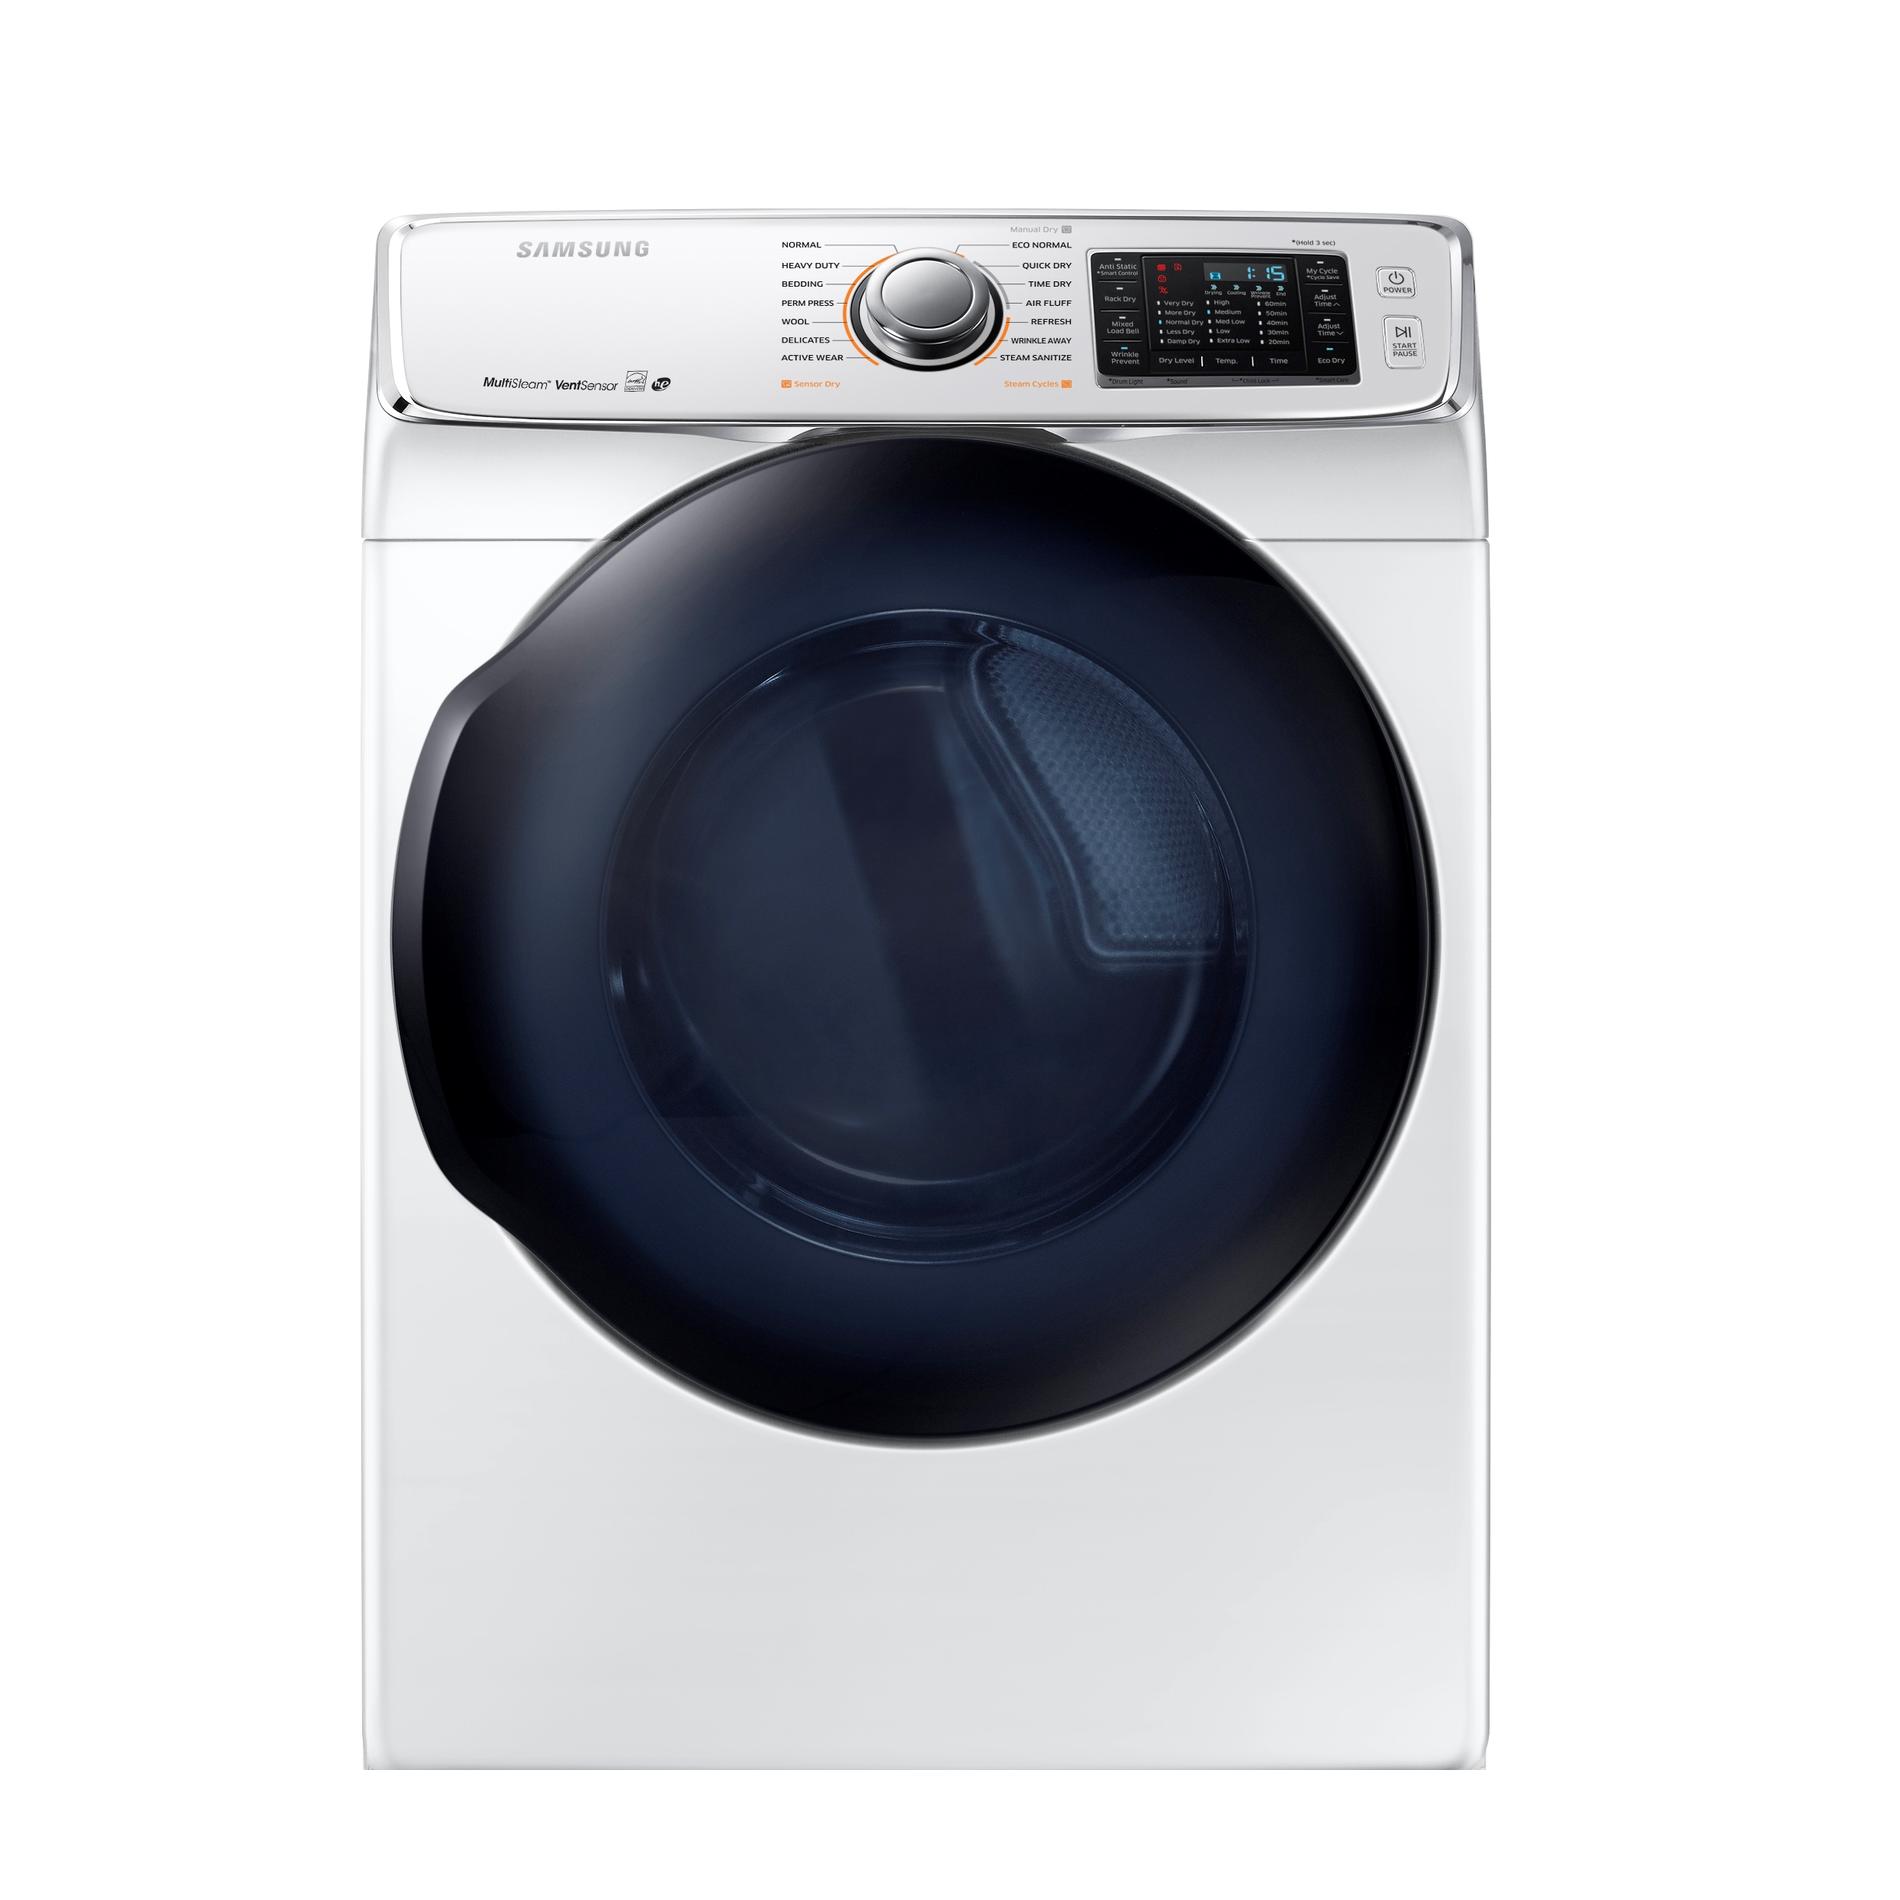 0887276135960 - SAMSUNG - 7.5 CU. FT. 14-CYCLE ELECTRIC DRYER WITH STEAM - WHITE